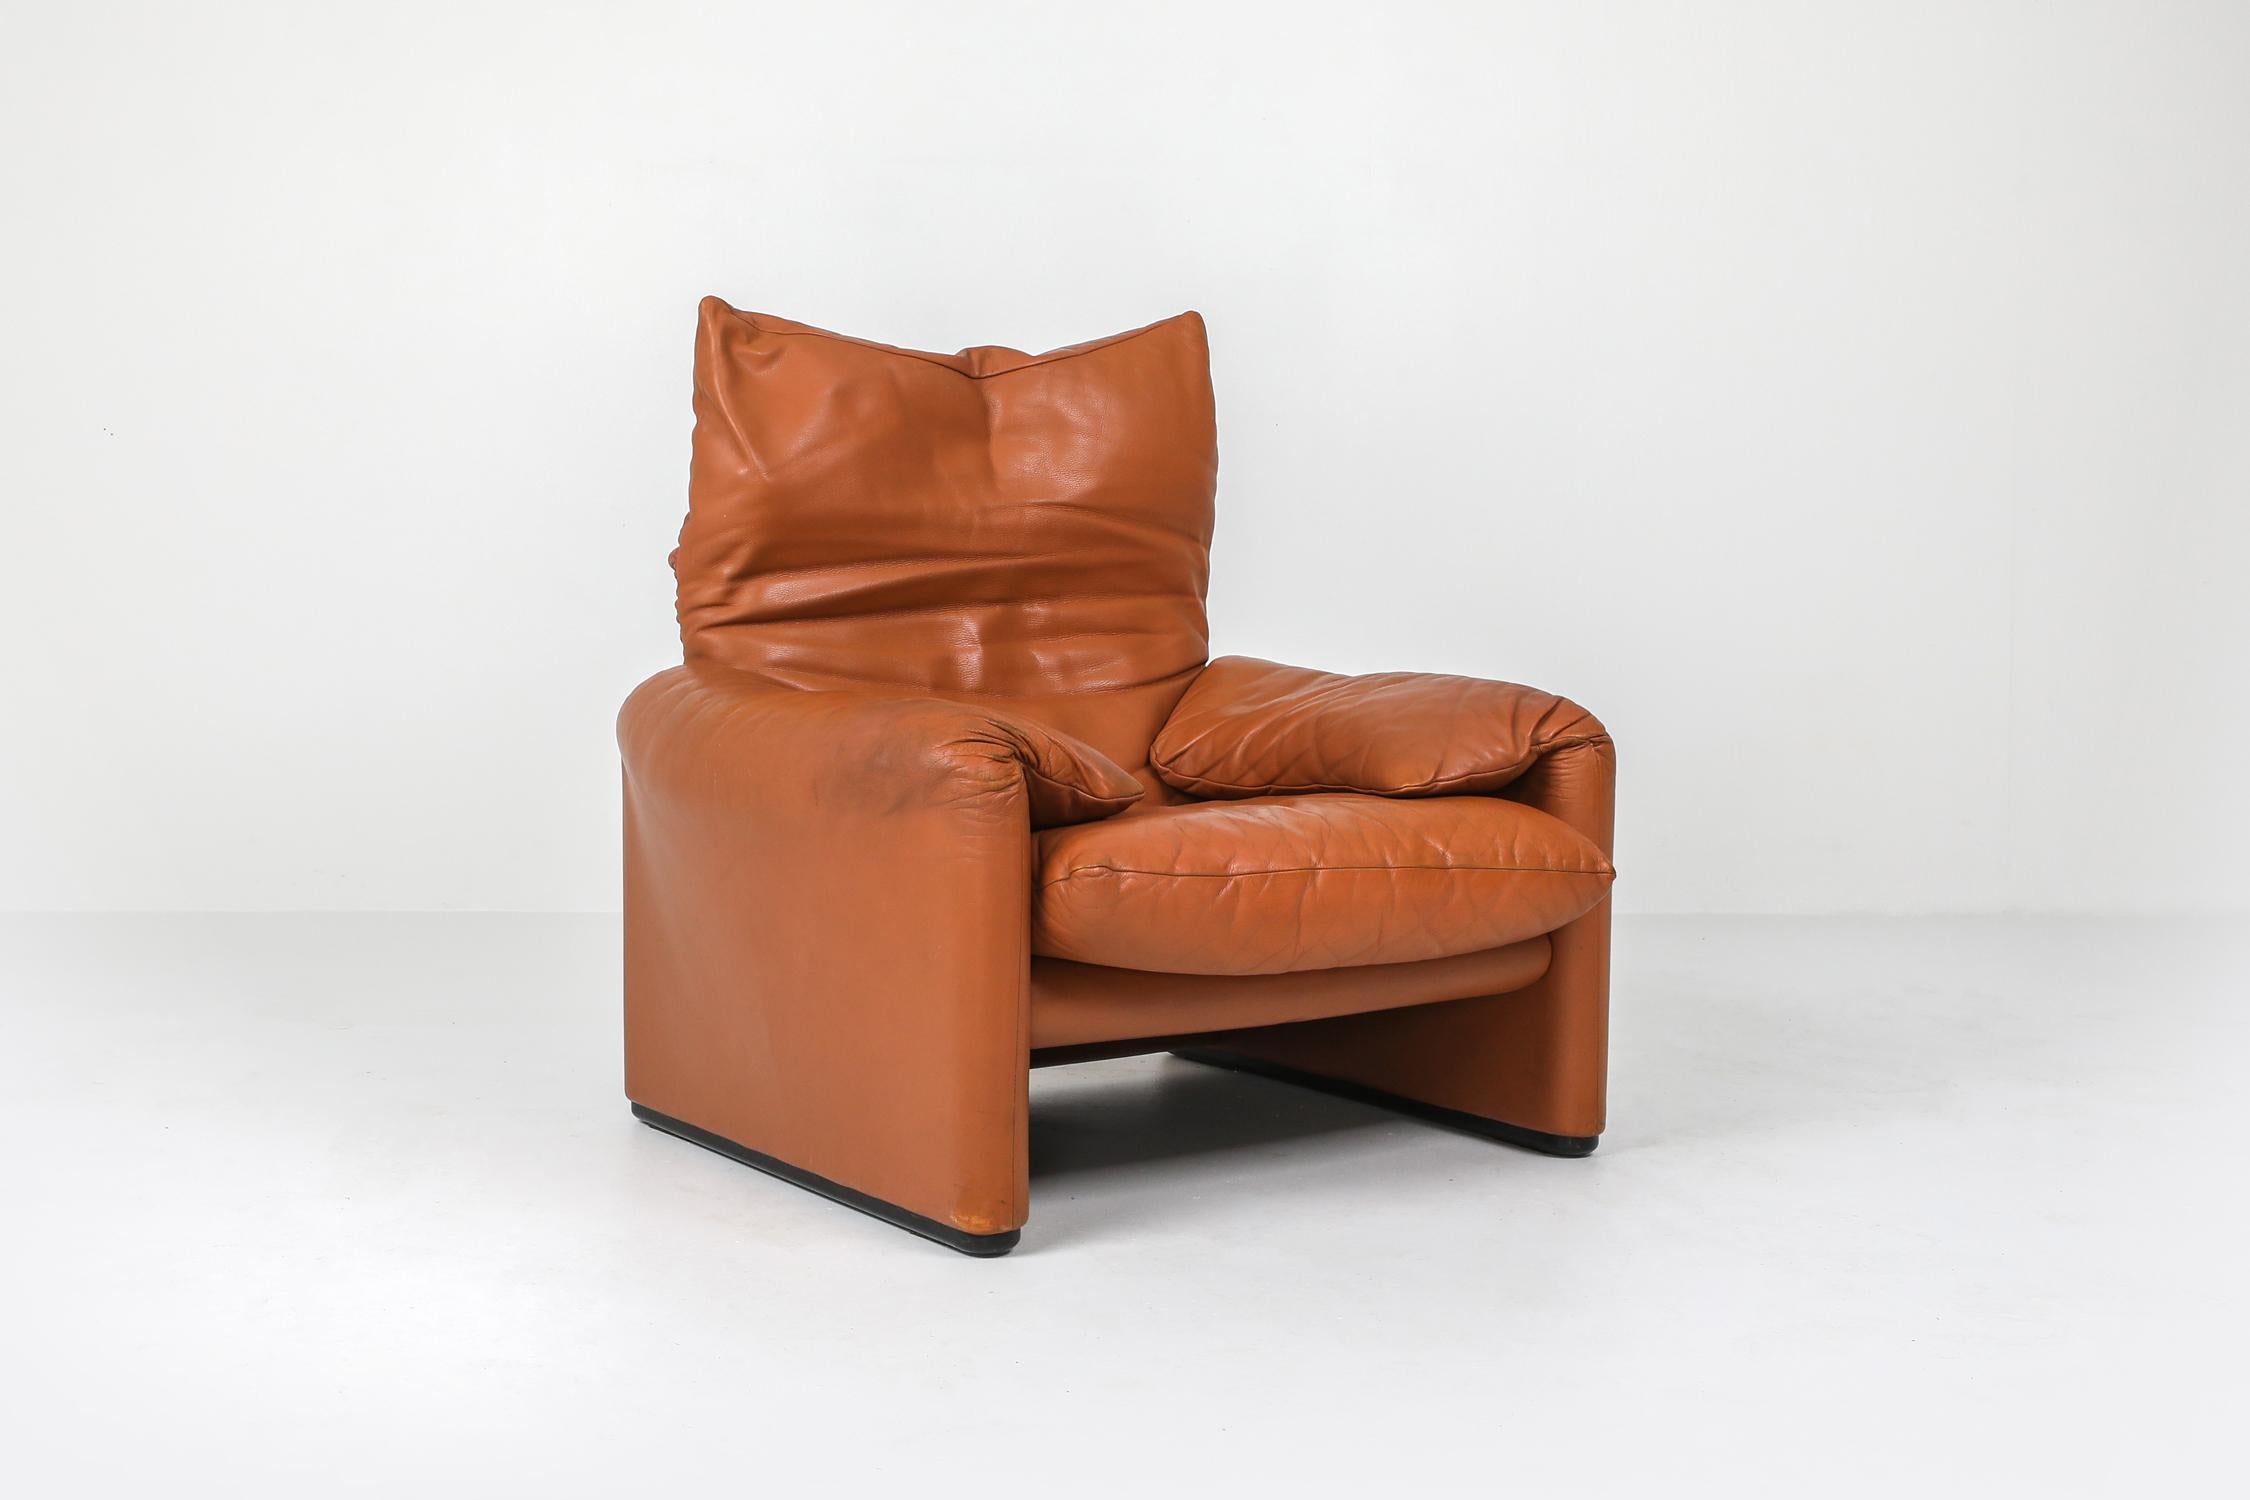 Maralunga Cognac Leather Club Chairs by Vico Magistretti for Cassina, 1974 1